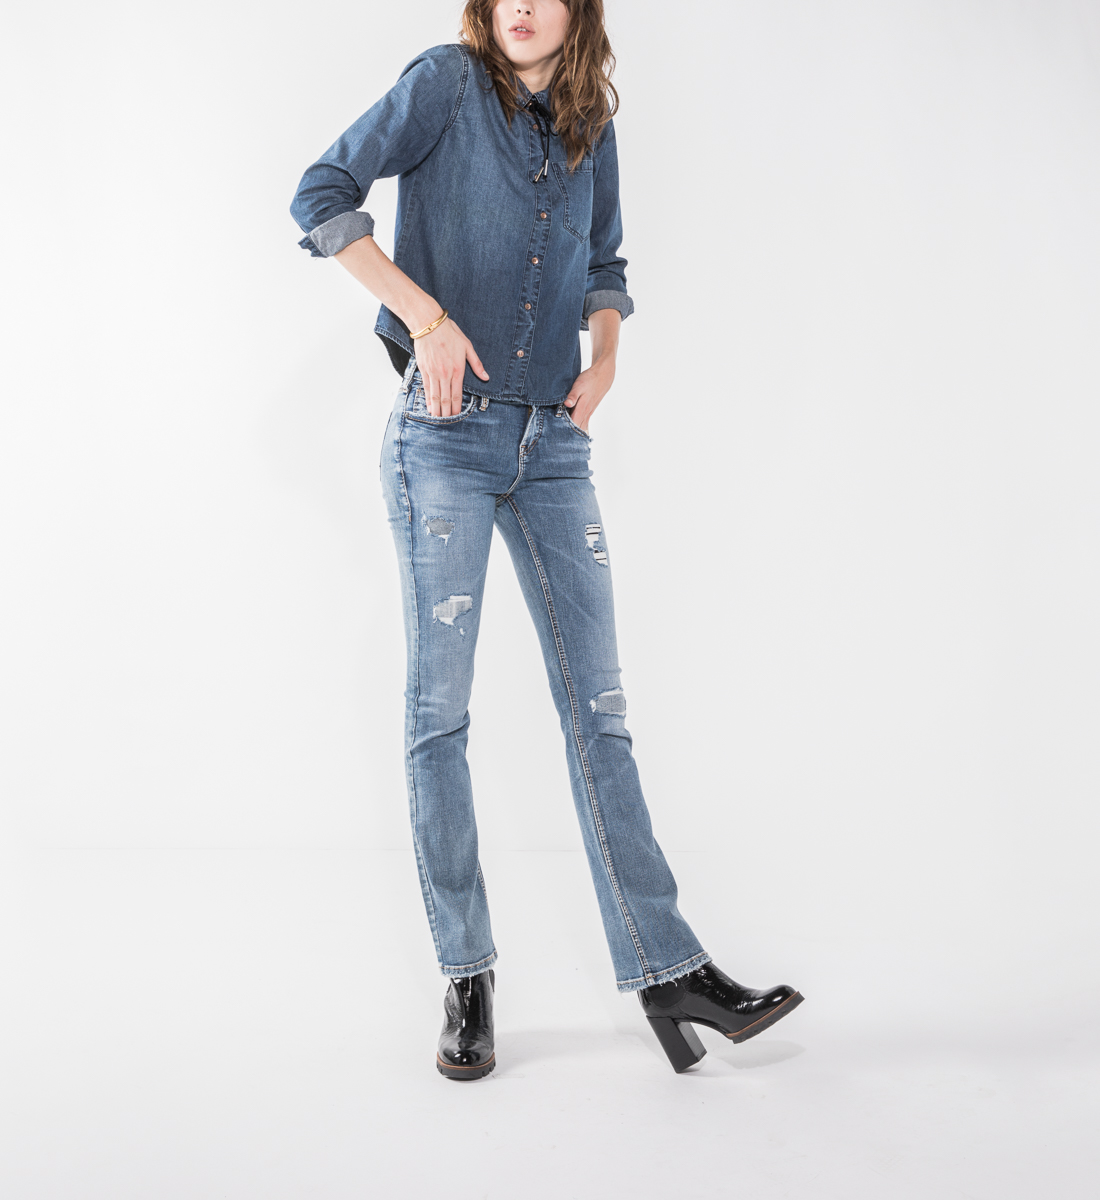 silver jeans aiko slim boot